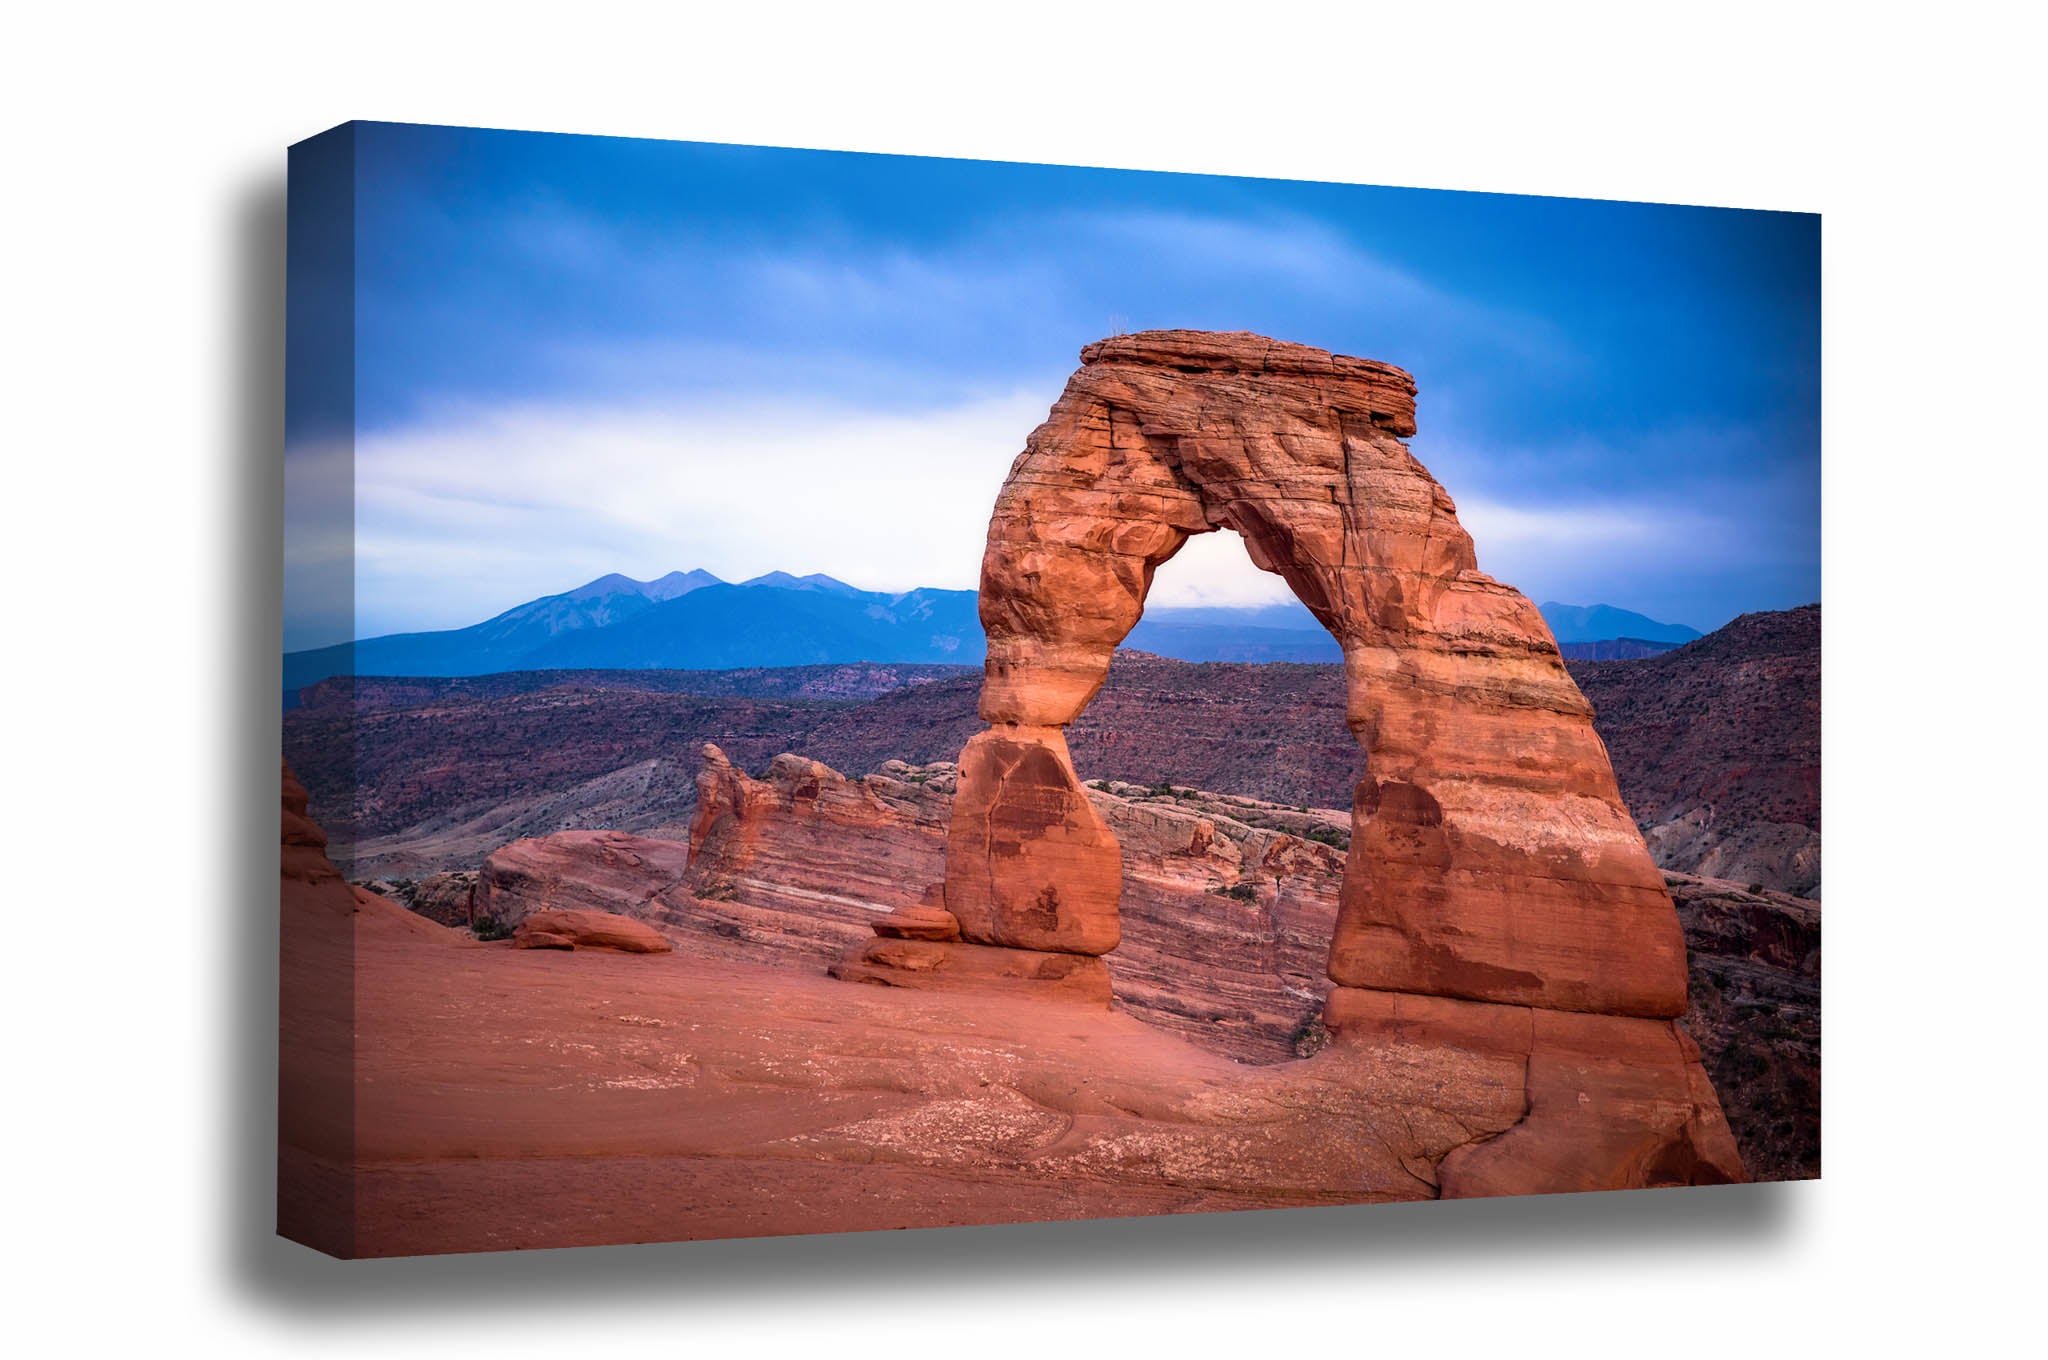 Western landscape canvas wall art of Delicate Arch on a rainy evening in the high desert in Arches National Park near Moab, Utah by Sean Ramsey of Southern Plains Photography.